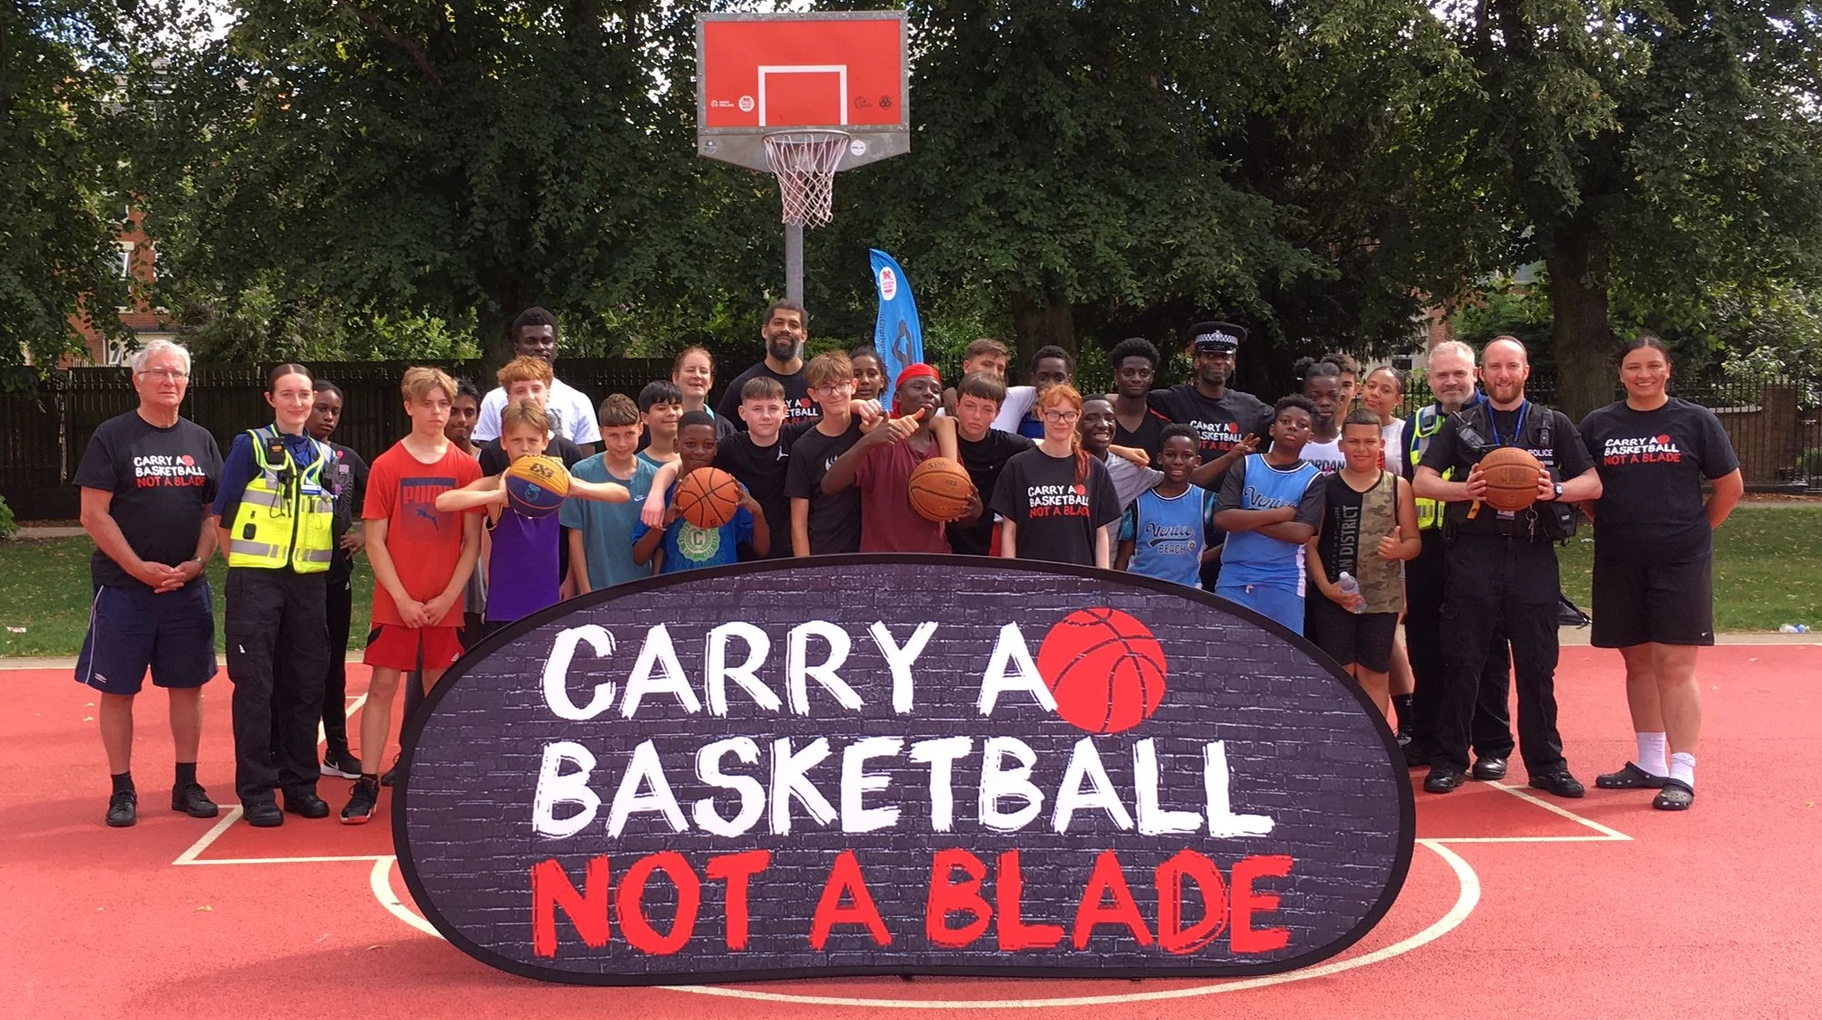 A group of adults and children including police officers and community support officers, outside on a sports court. Some are wearing sports attire, some are holding basketballs. They are in front of a basketball hoop and new and behind a large sign saying 